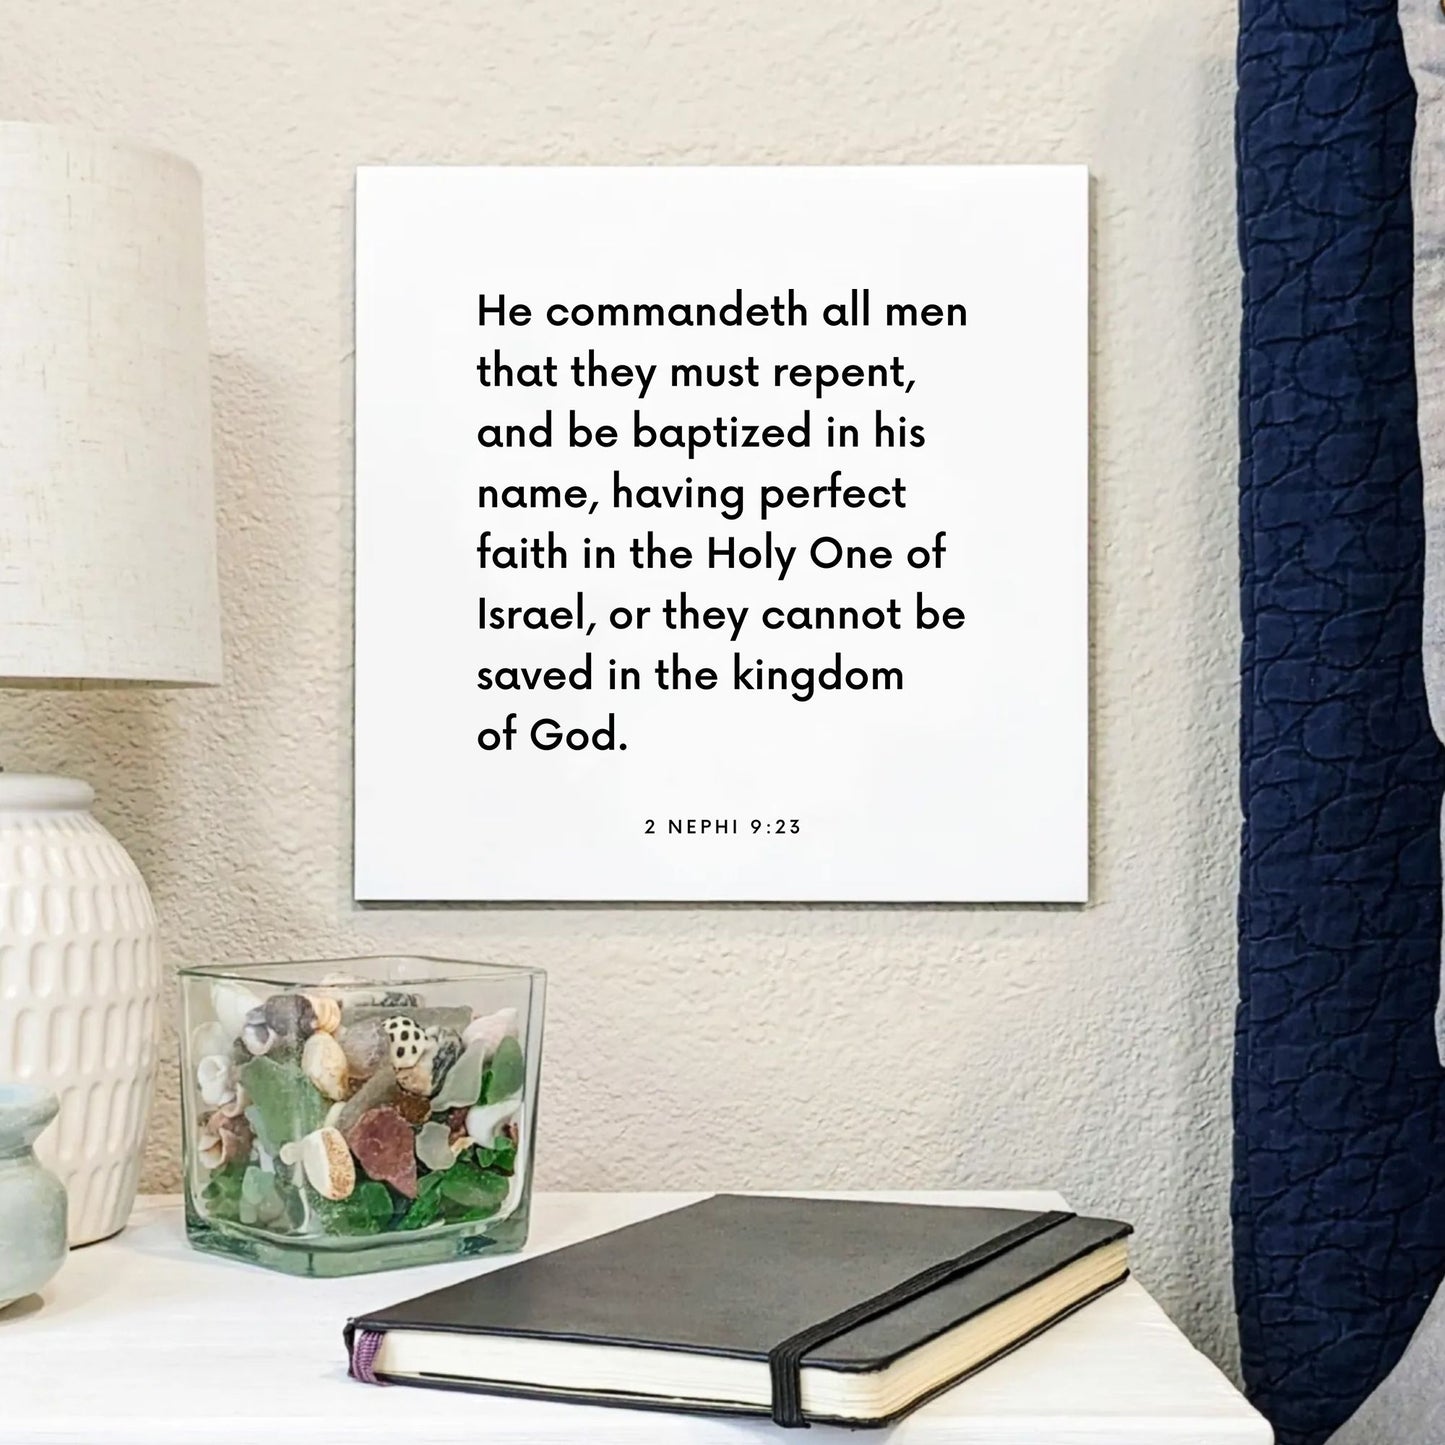 Bedside mouting of the scripture tile for 2 Nephi 9:23 - "Having perfect faith in the Holy One of Israel"